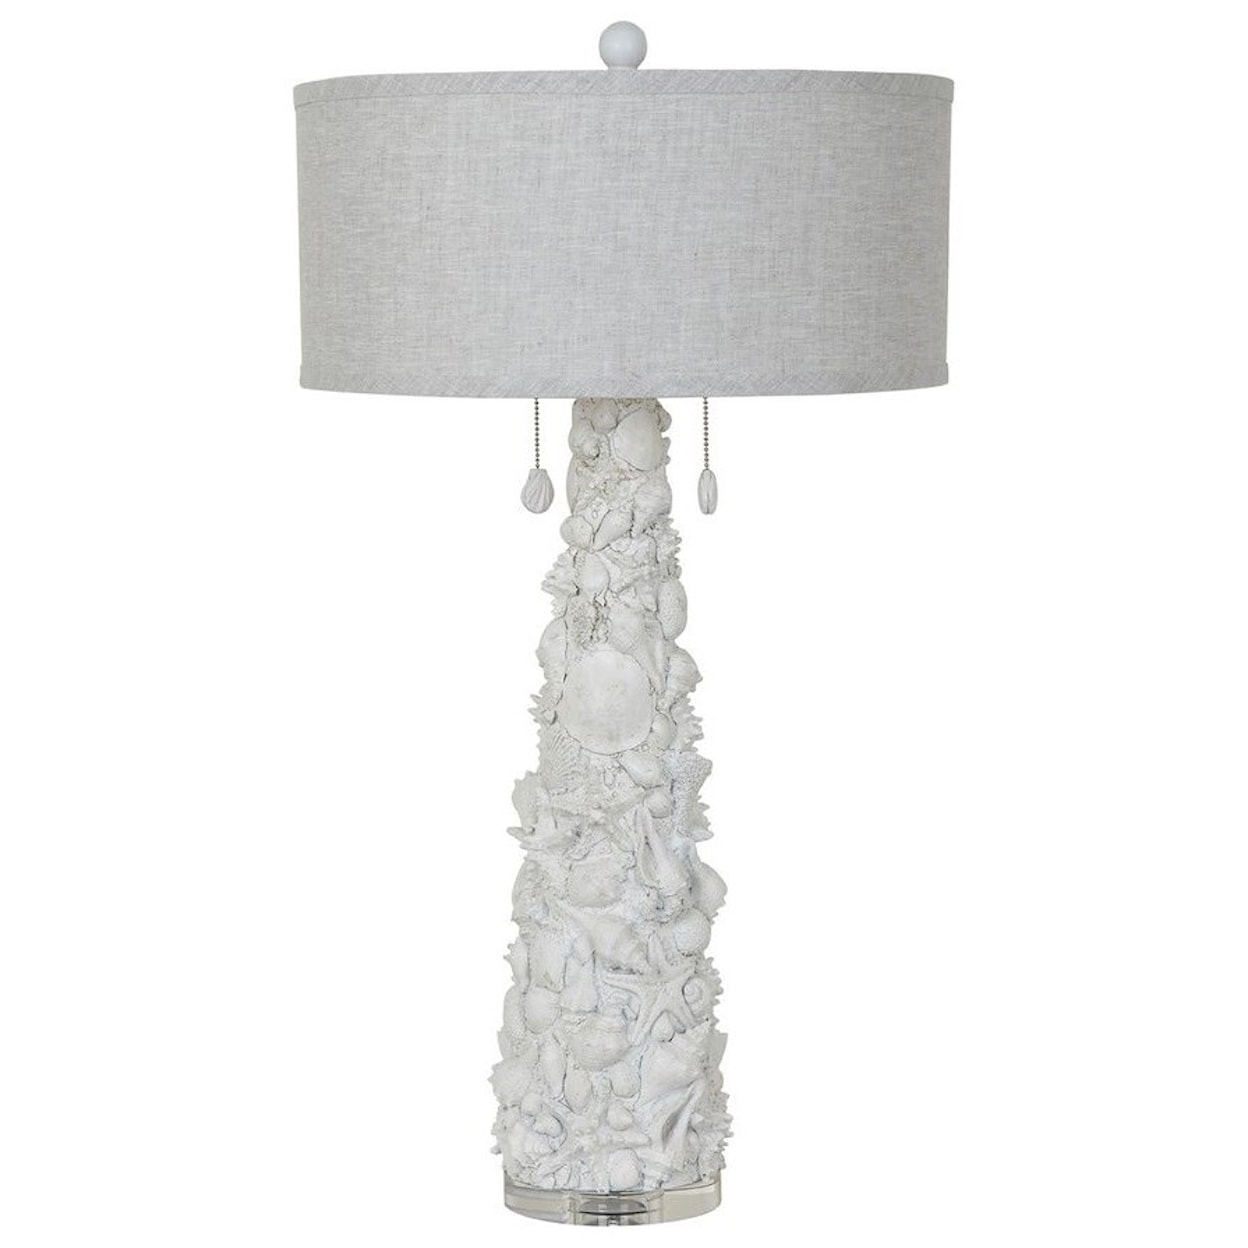 Crestview Collection Lighting Caicos Table Lamp 